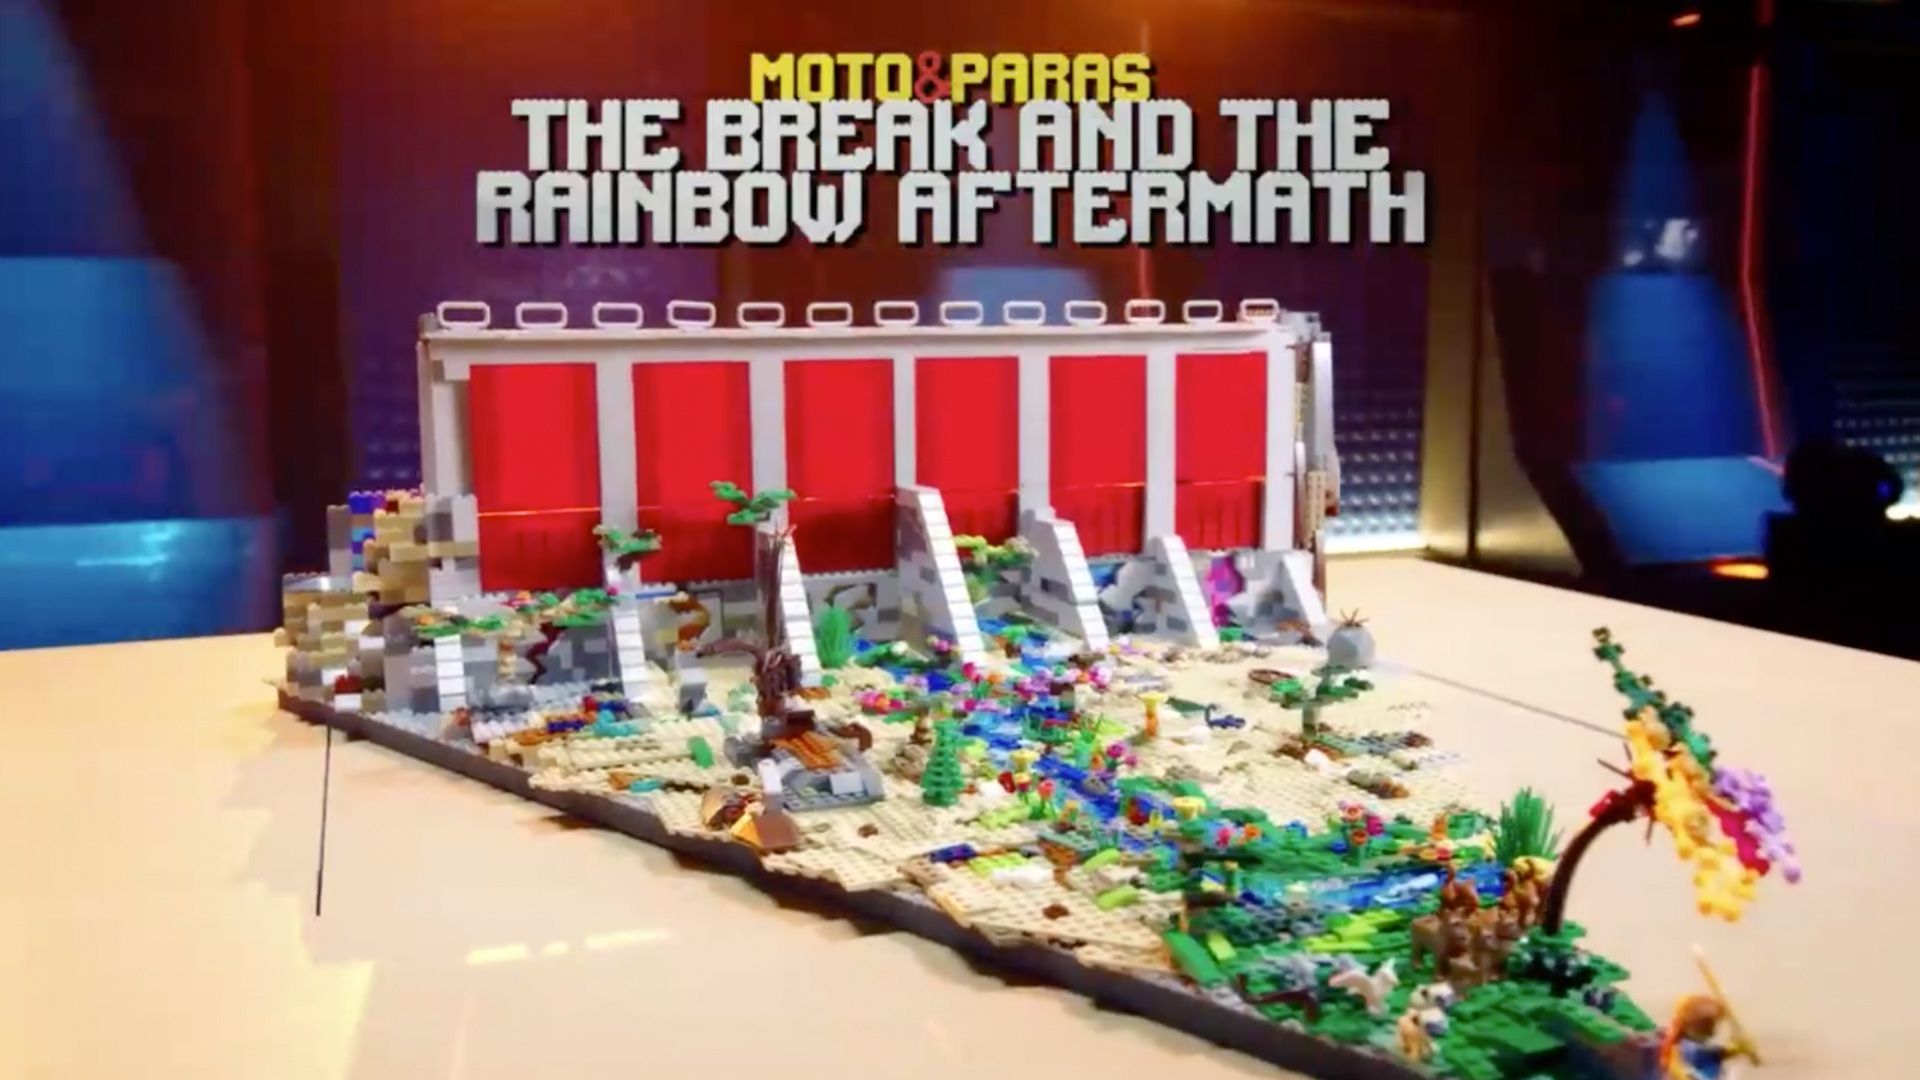 LEGO Masters U.S Season 2 – Explosion Challenge – Paras and Moto - Elf Girl - Water - The Break & The Rainbow Aftermath